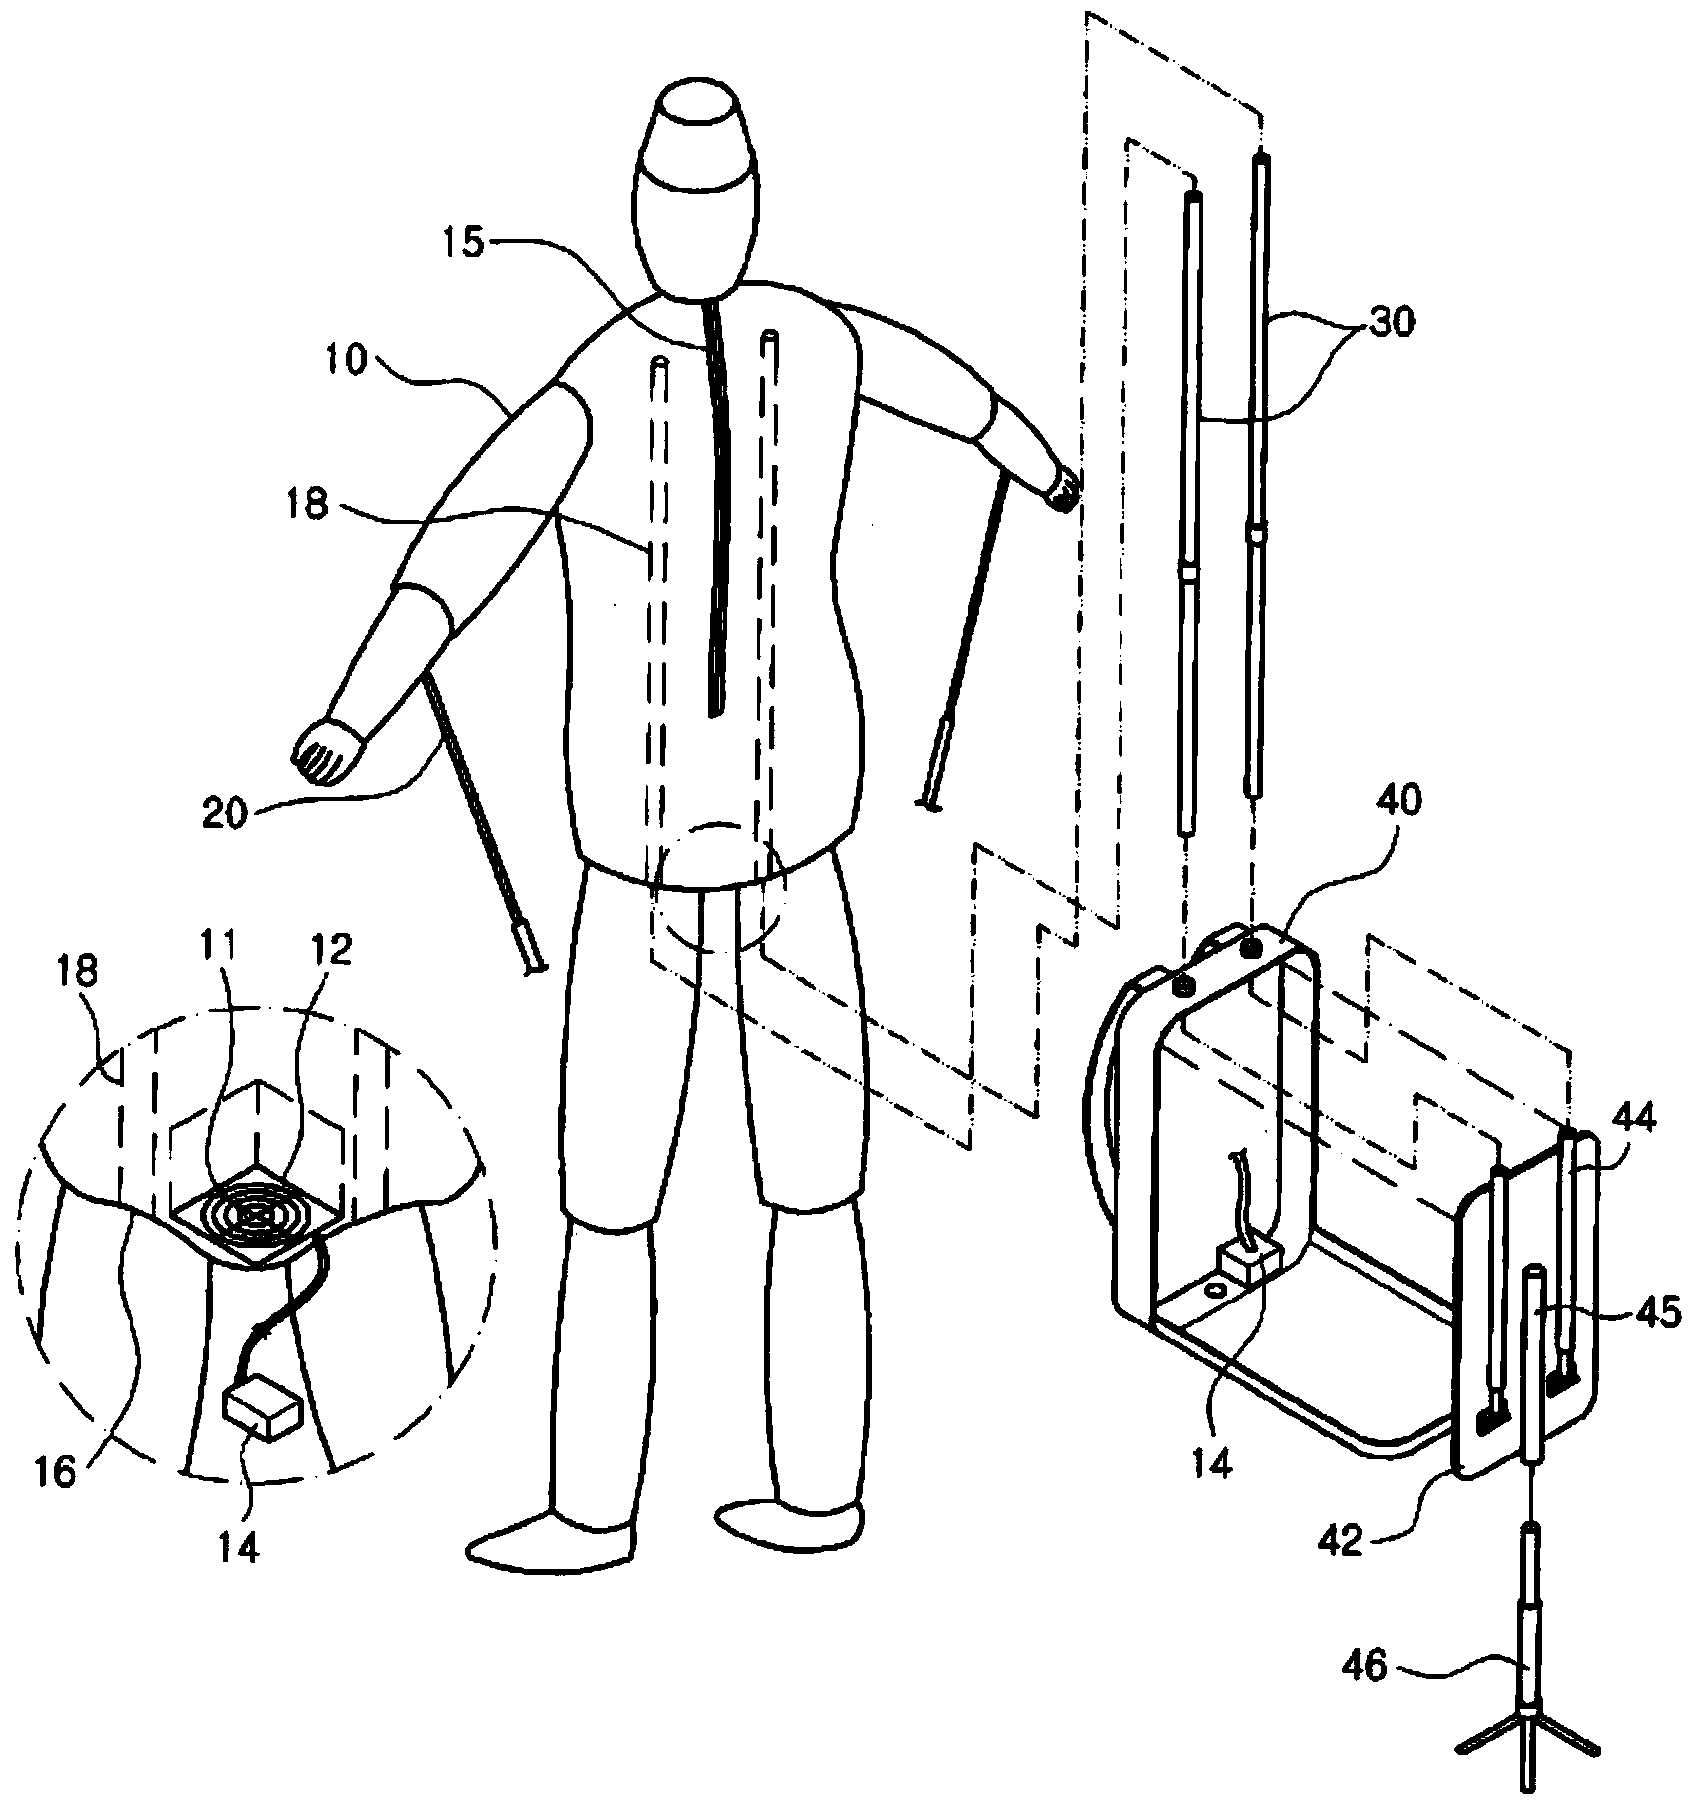 Backpack-type large-scale promotional mannequin